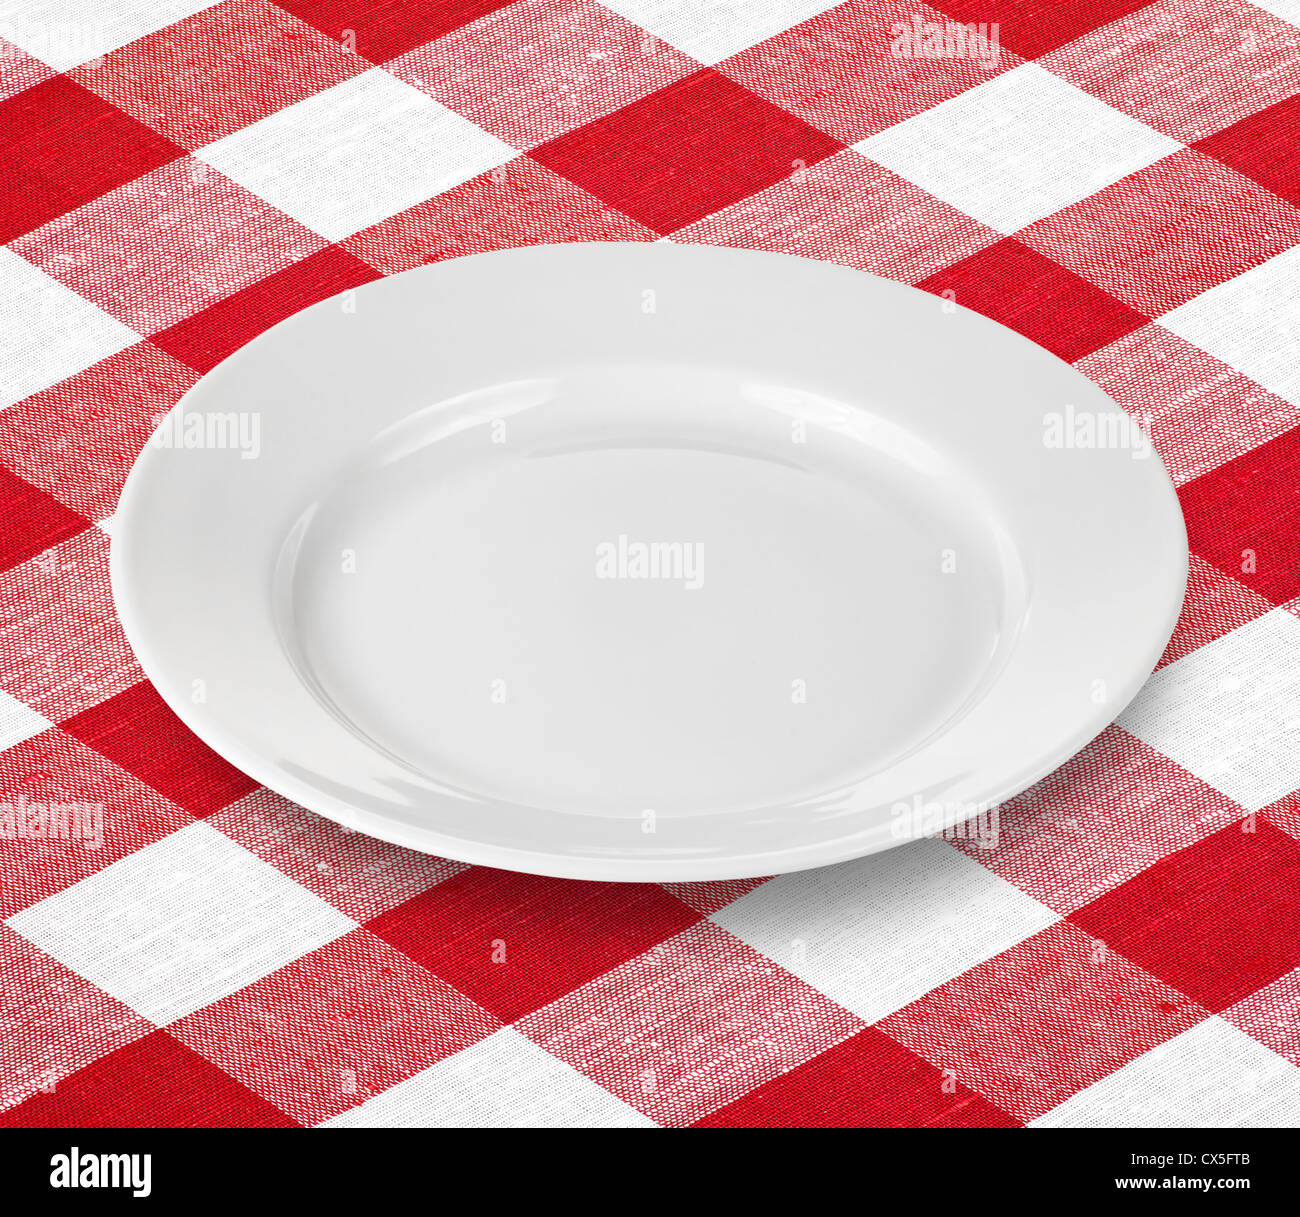 white empty plate on red gingham tablecloth Stock Photo